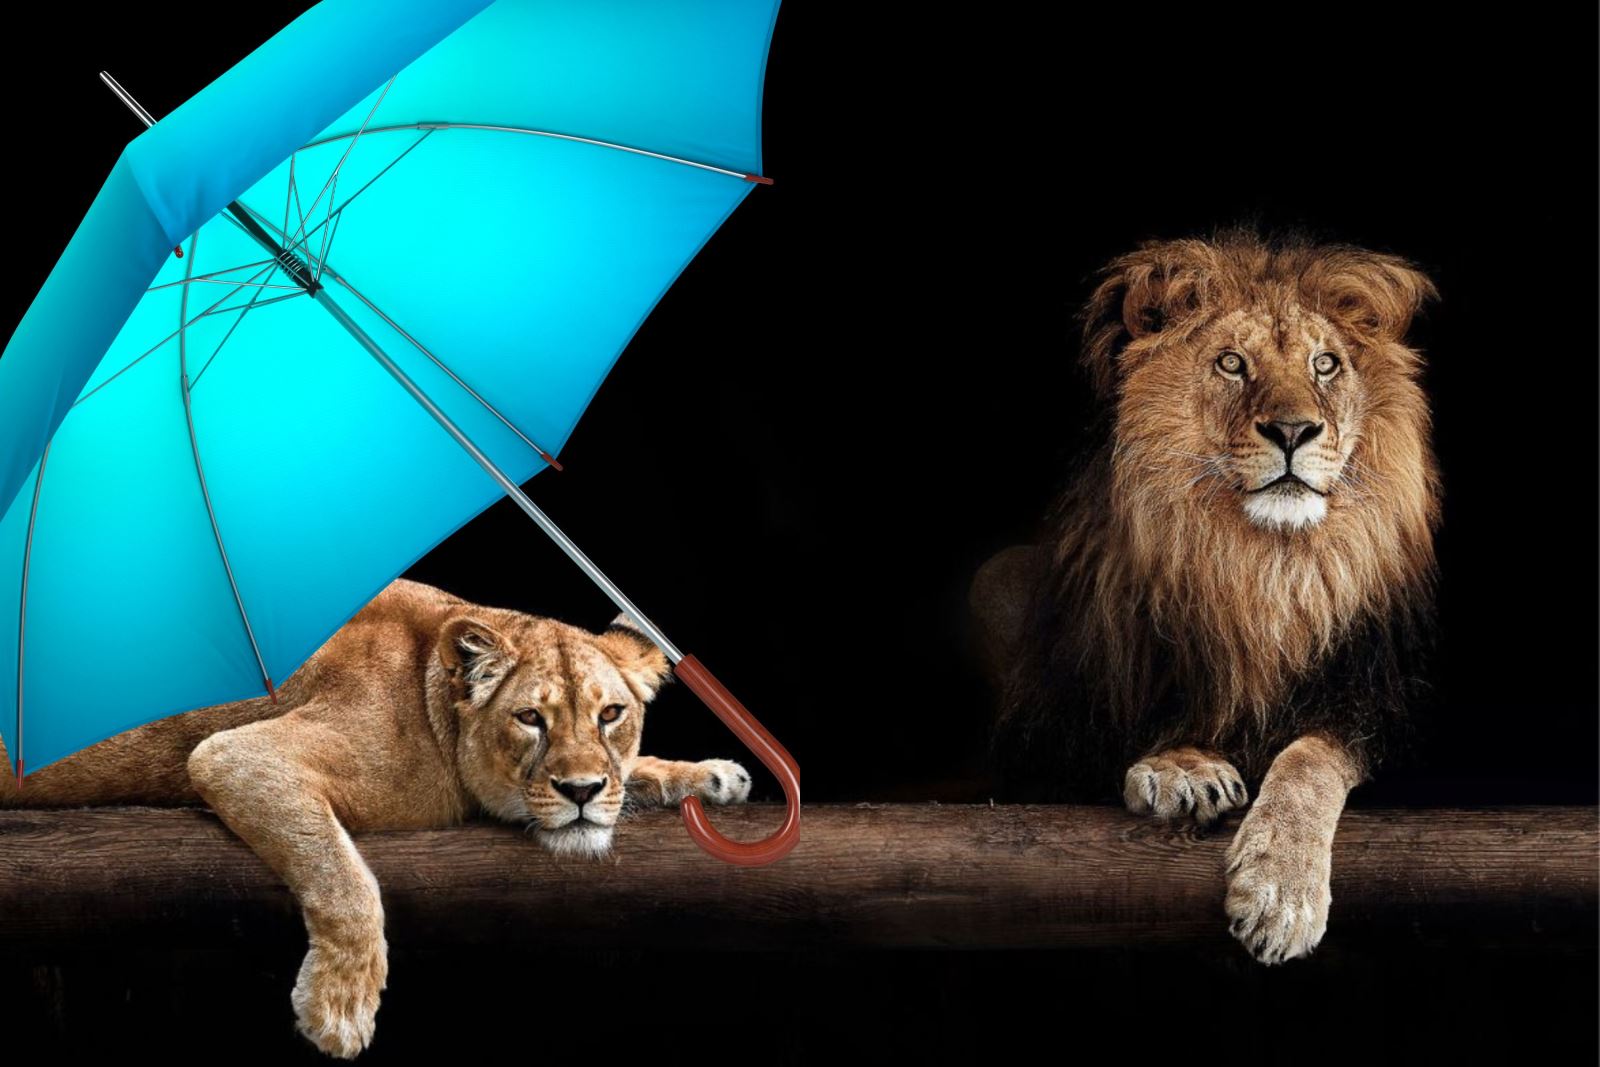 Two lions and a blue umbrella